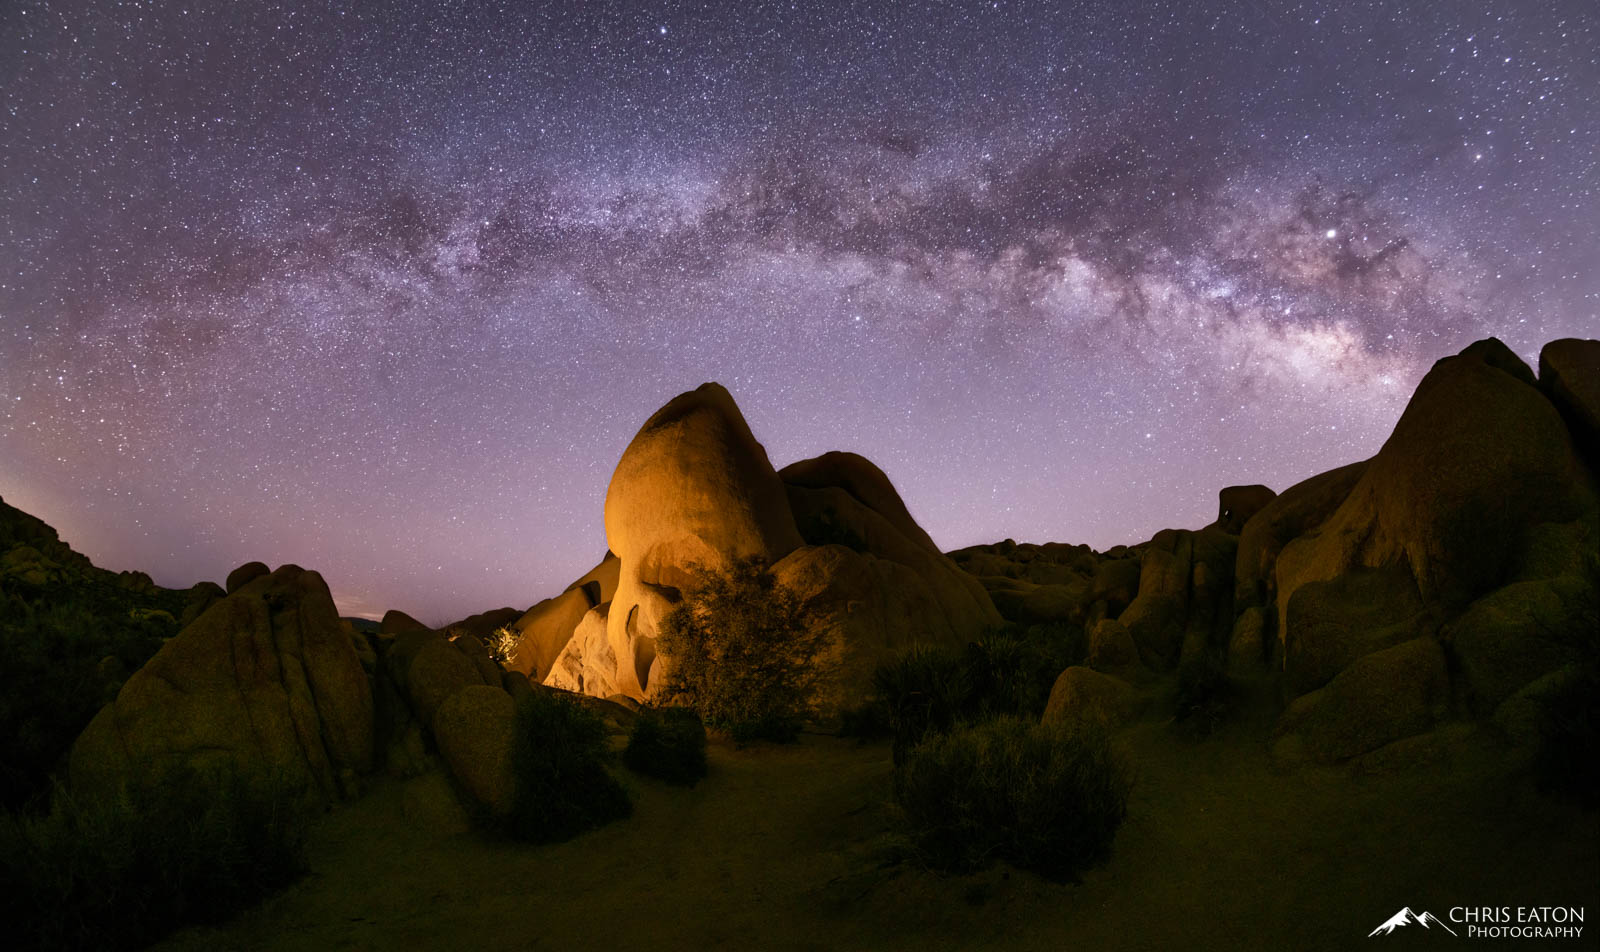 The early spring Milky Way arches over Skull Rock in the Jumbo Rocks area of Joshua Tree National Park.